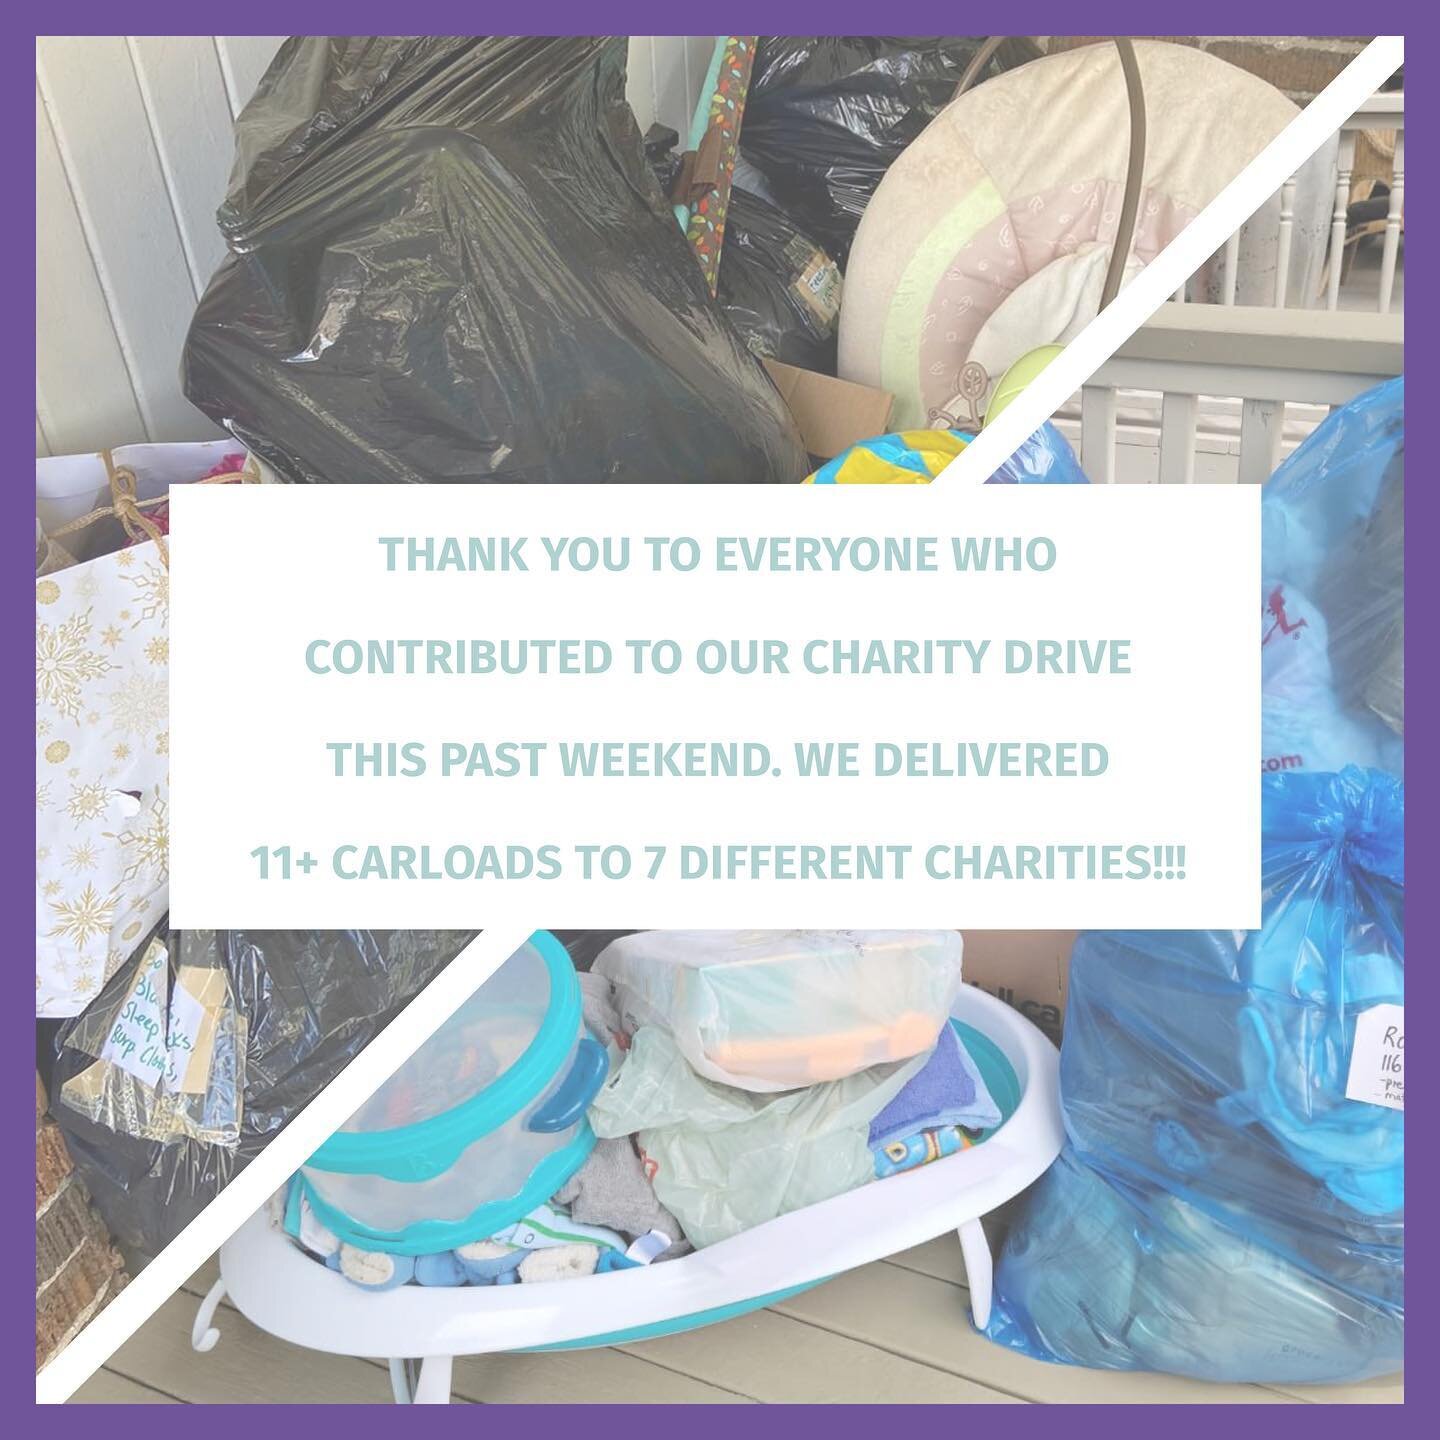 Thank you so much to everyone who contributed to our charity drive this past weekend. We had over 11 carloads full of donations for our 7 charities 💜#ntmoms #torontomoms #charitydrive #donations